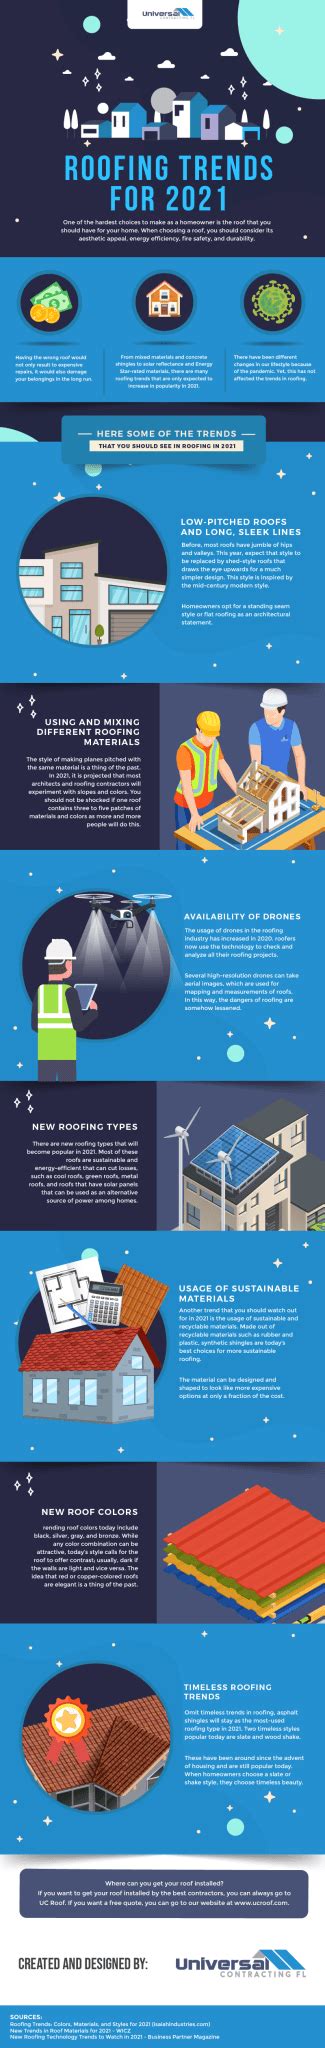 2021 Roofing Trends Infographic